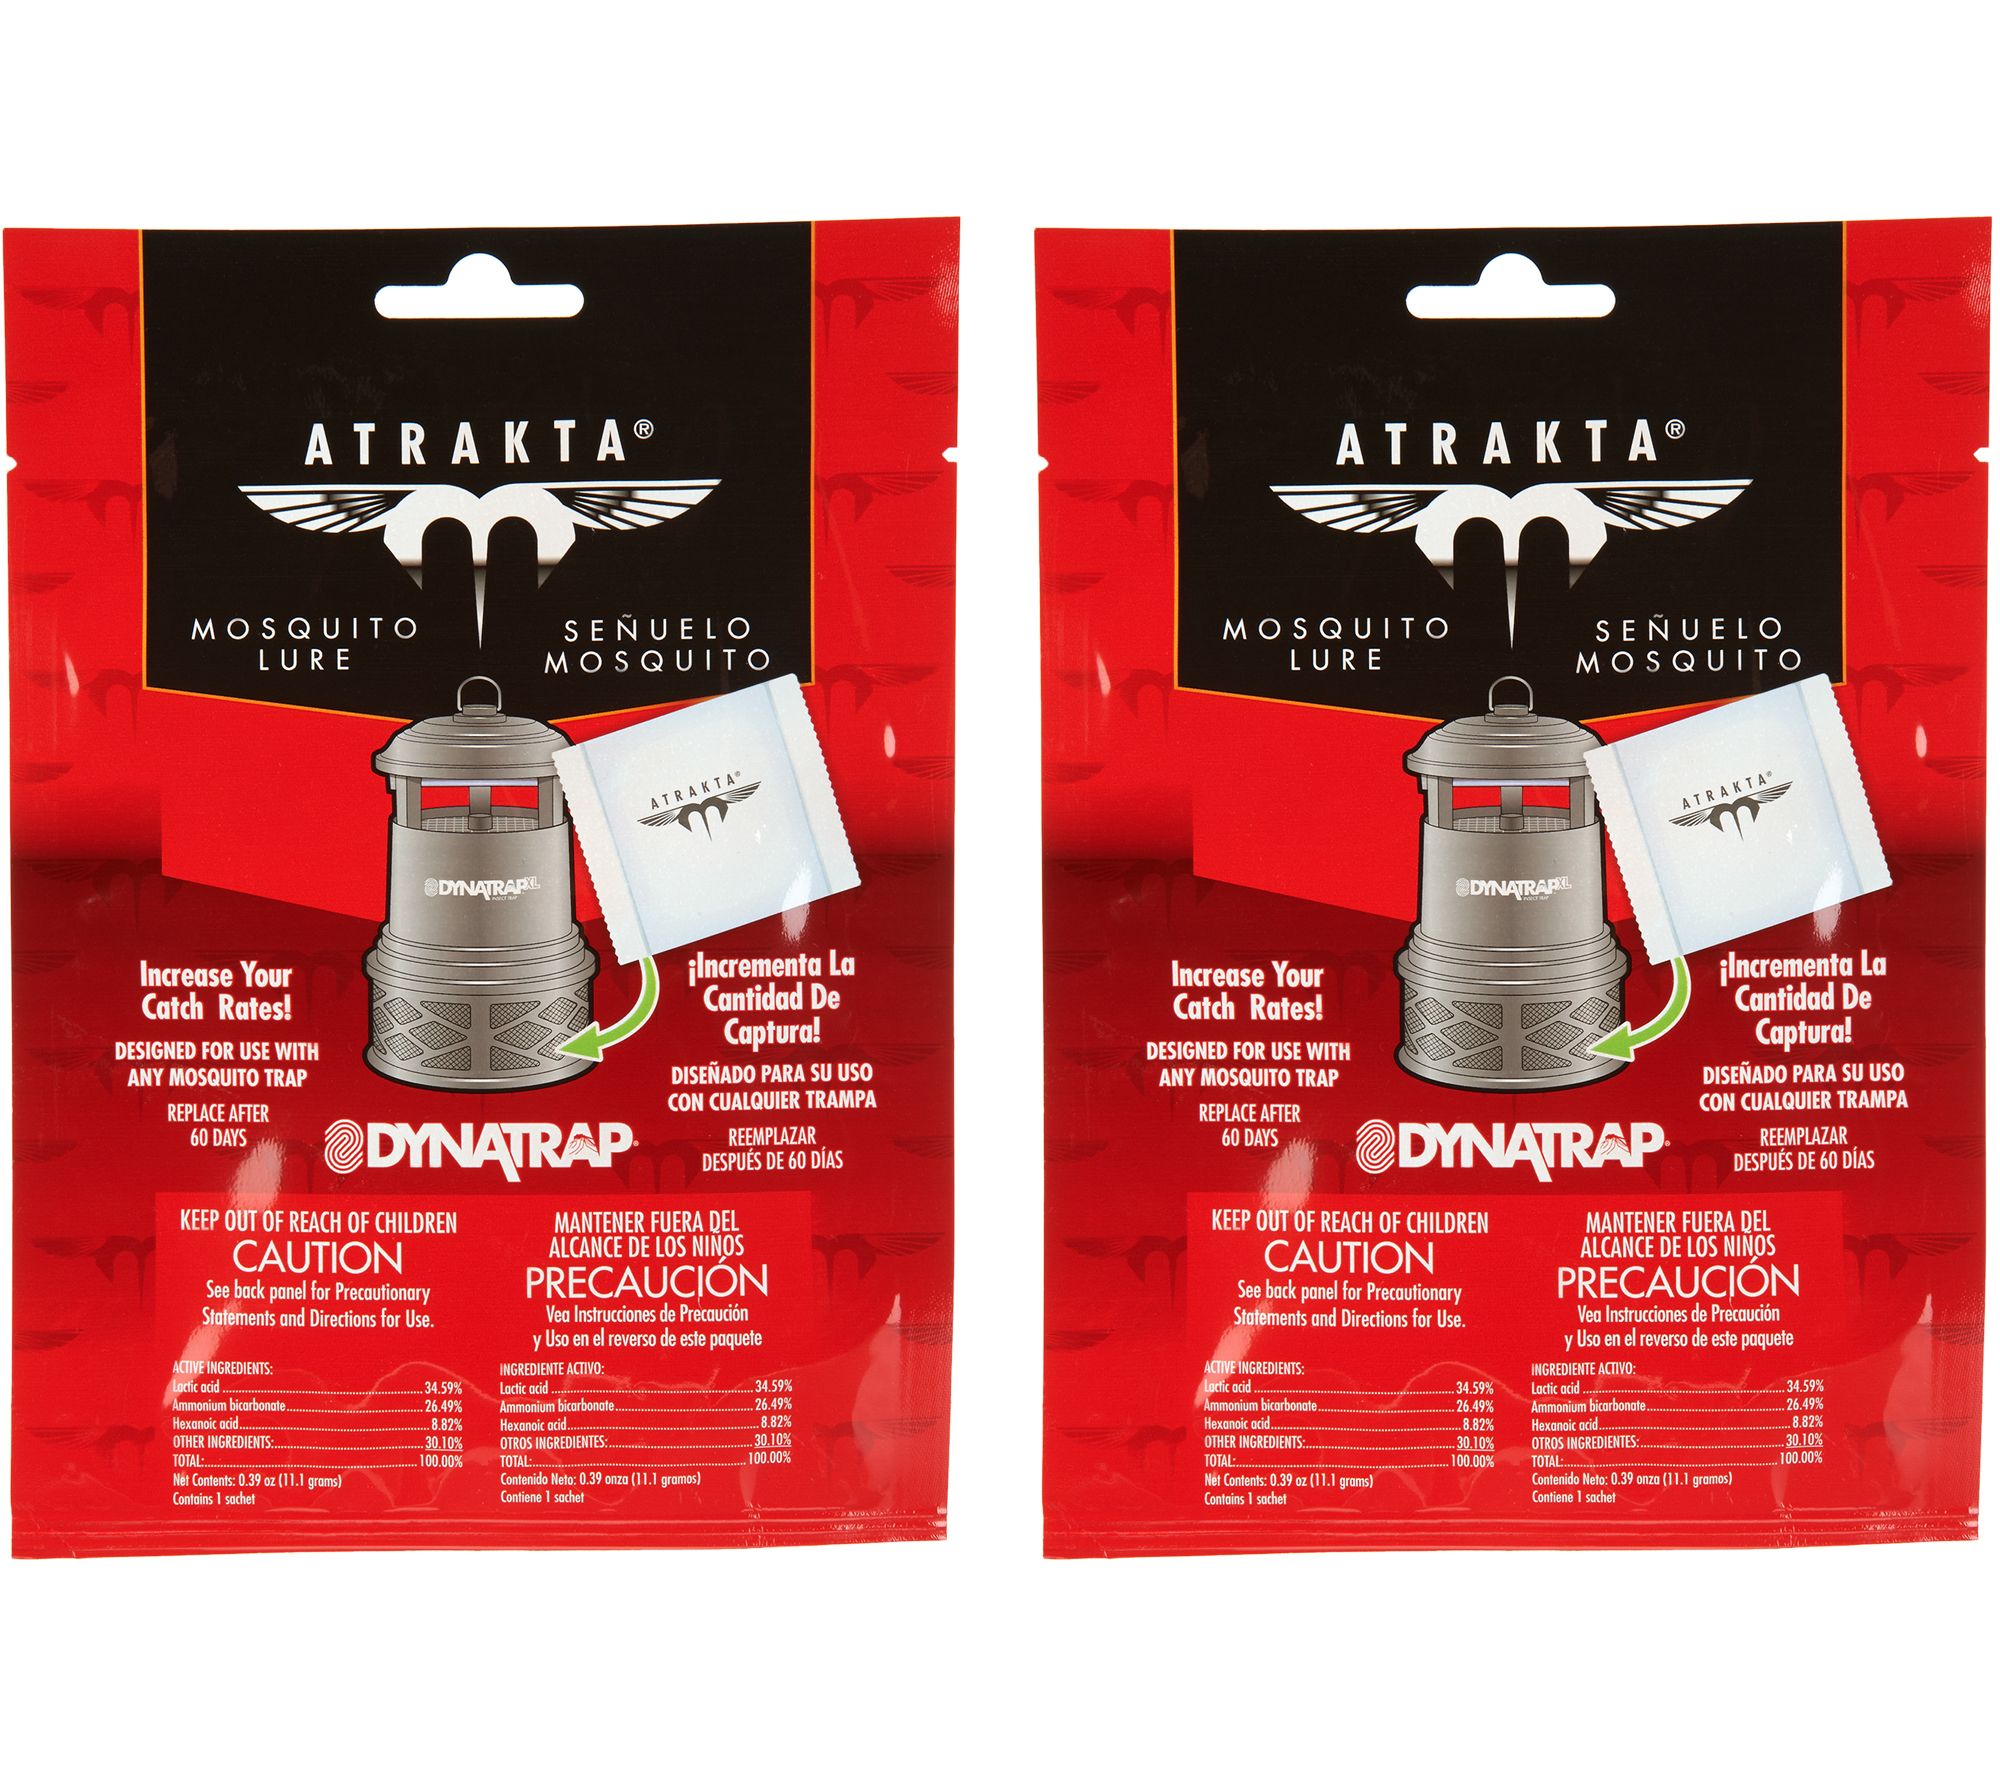  Customer reviews: DynaTrap 100611 Atrakta Mosquito Lure Sachet  for Any DynaTrap Insect Trap, Lasts 60 Days, Mosquito Trap Attractant